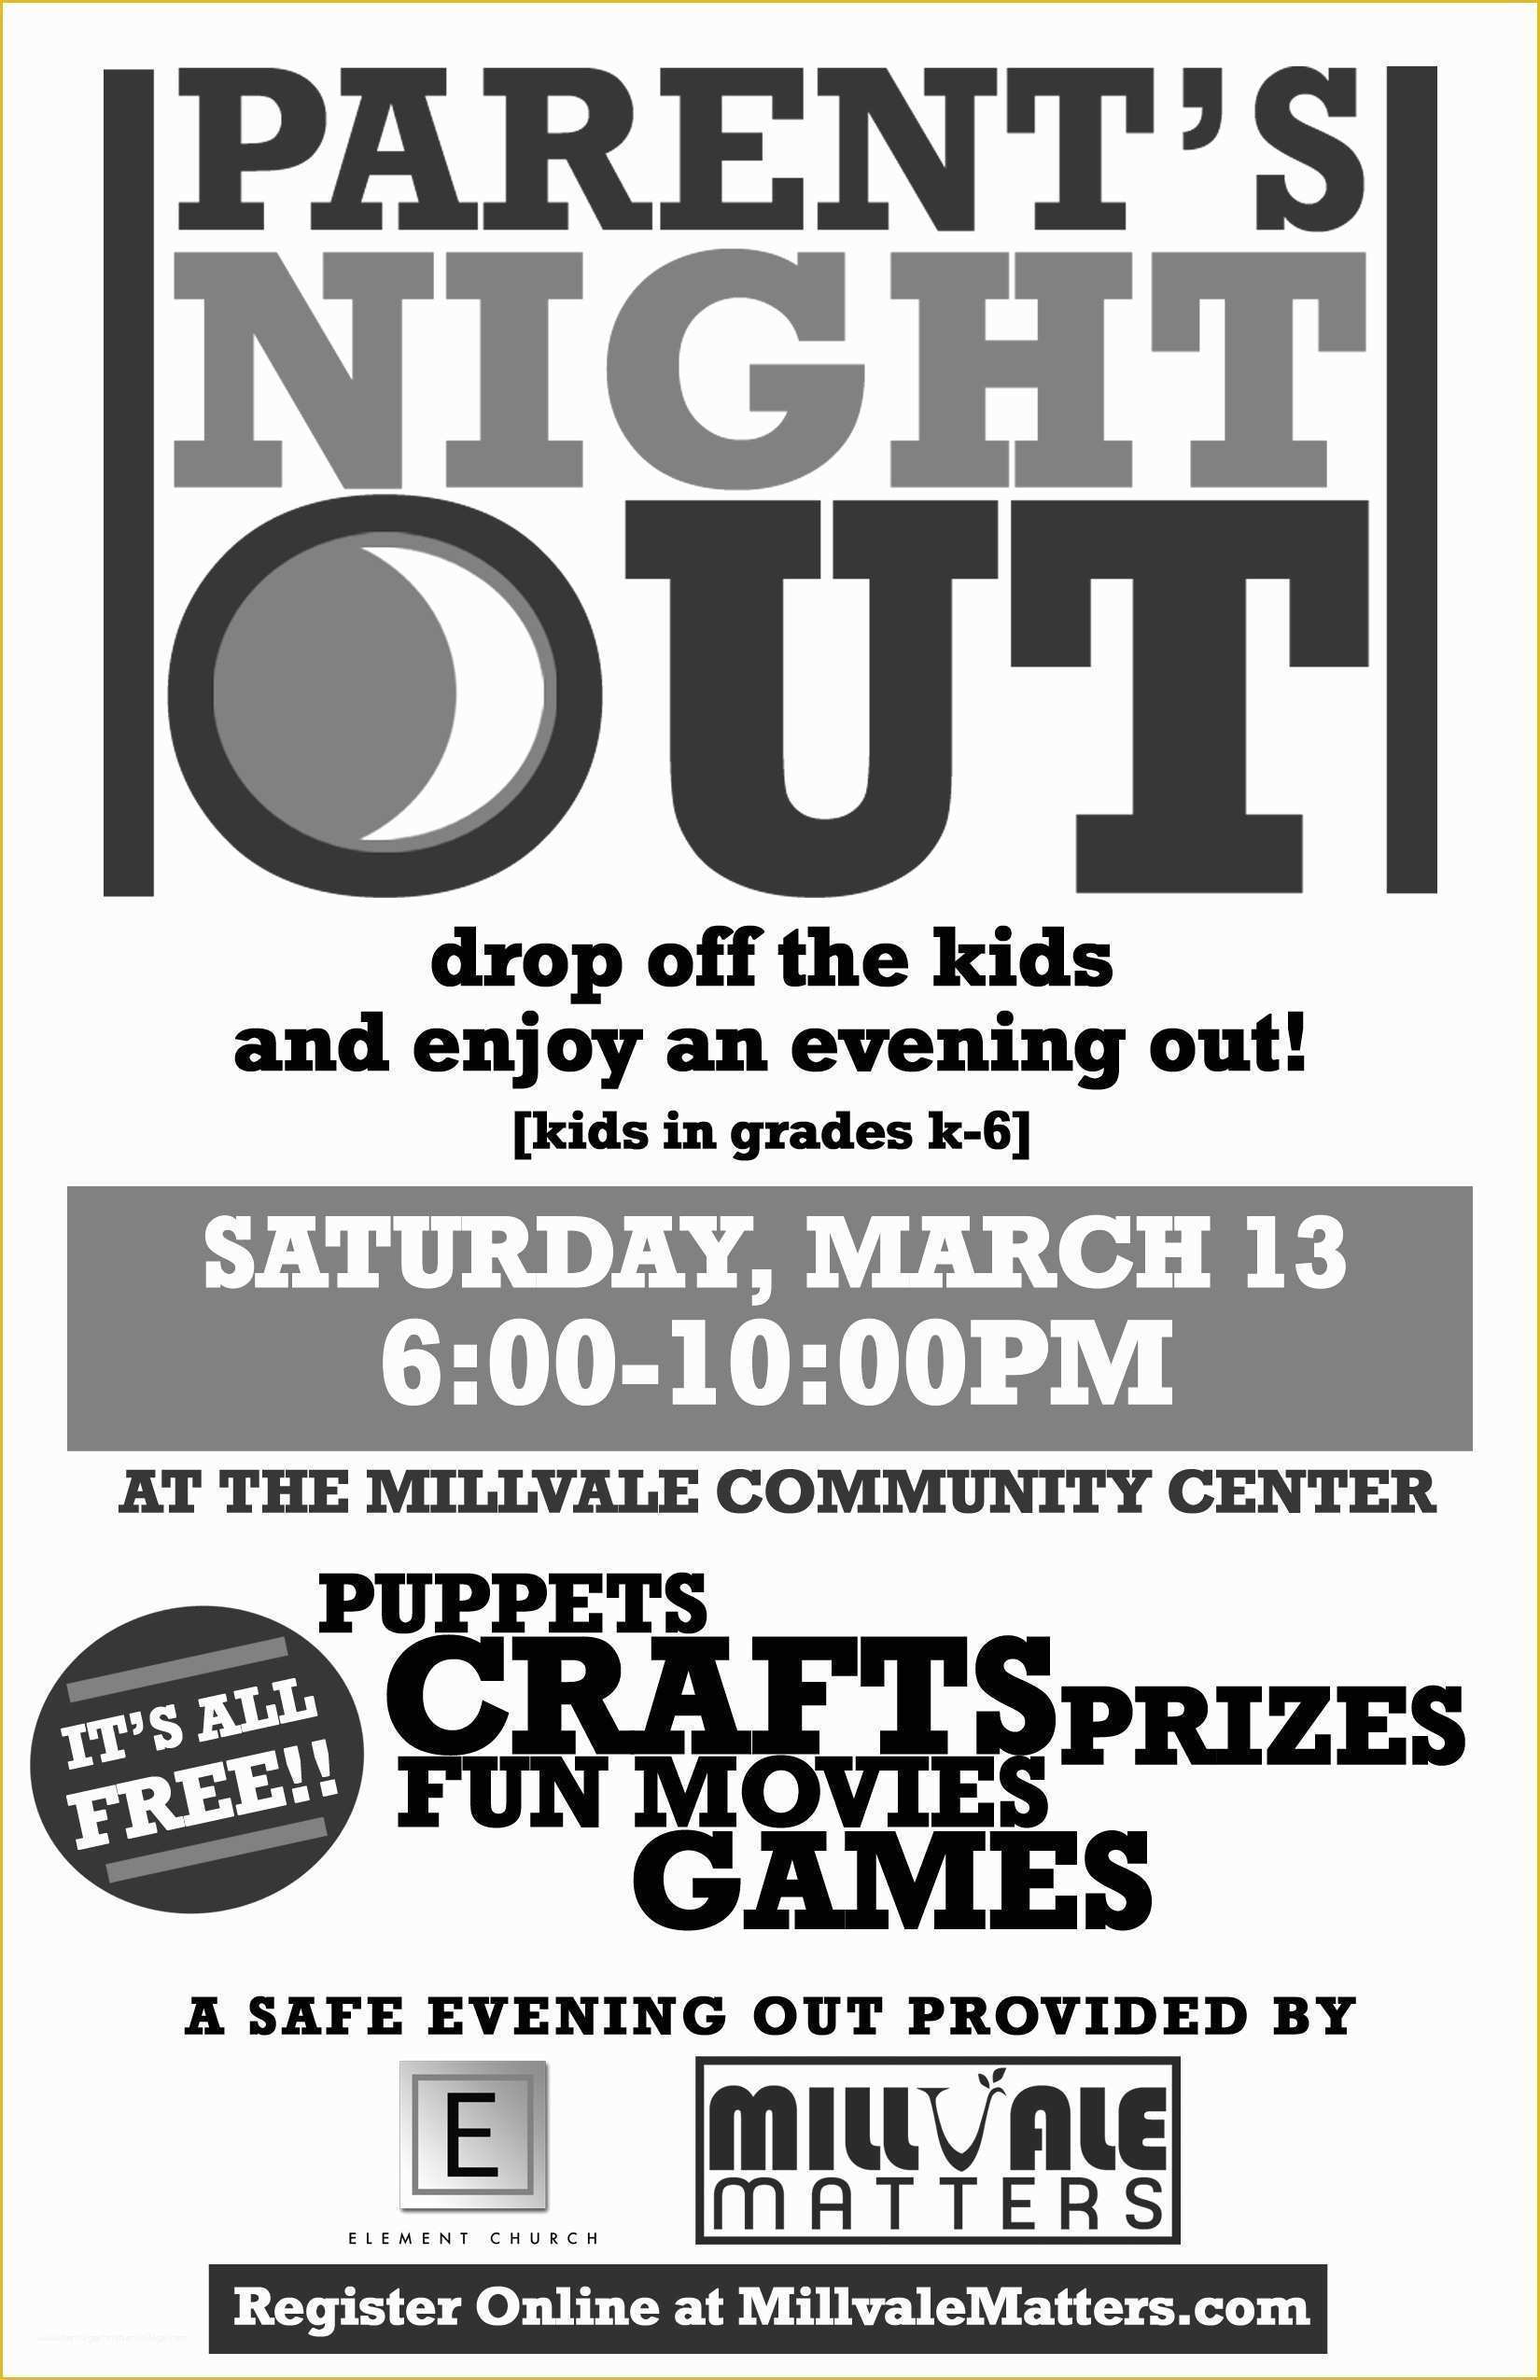 Parents Night Out Flyer Template Free Of Millvale Matters Caring for the People Of Millvale